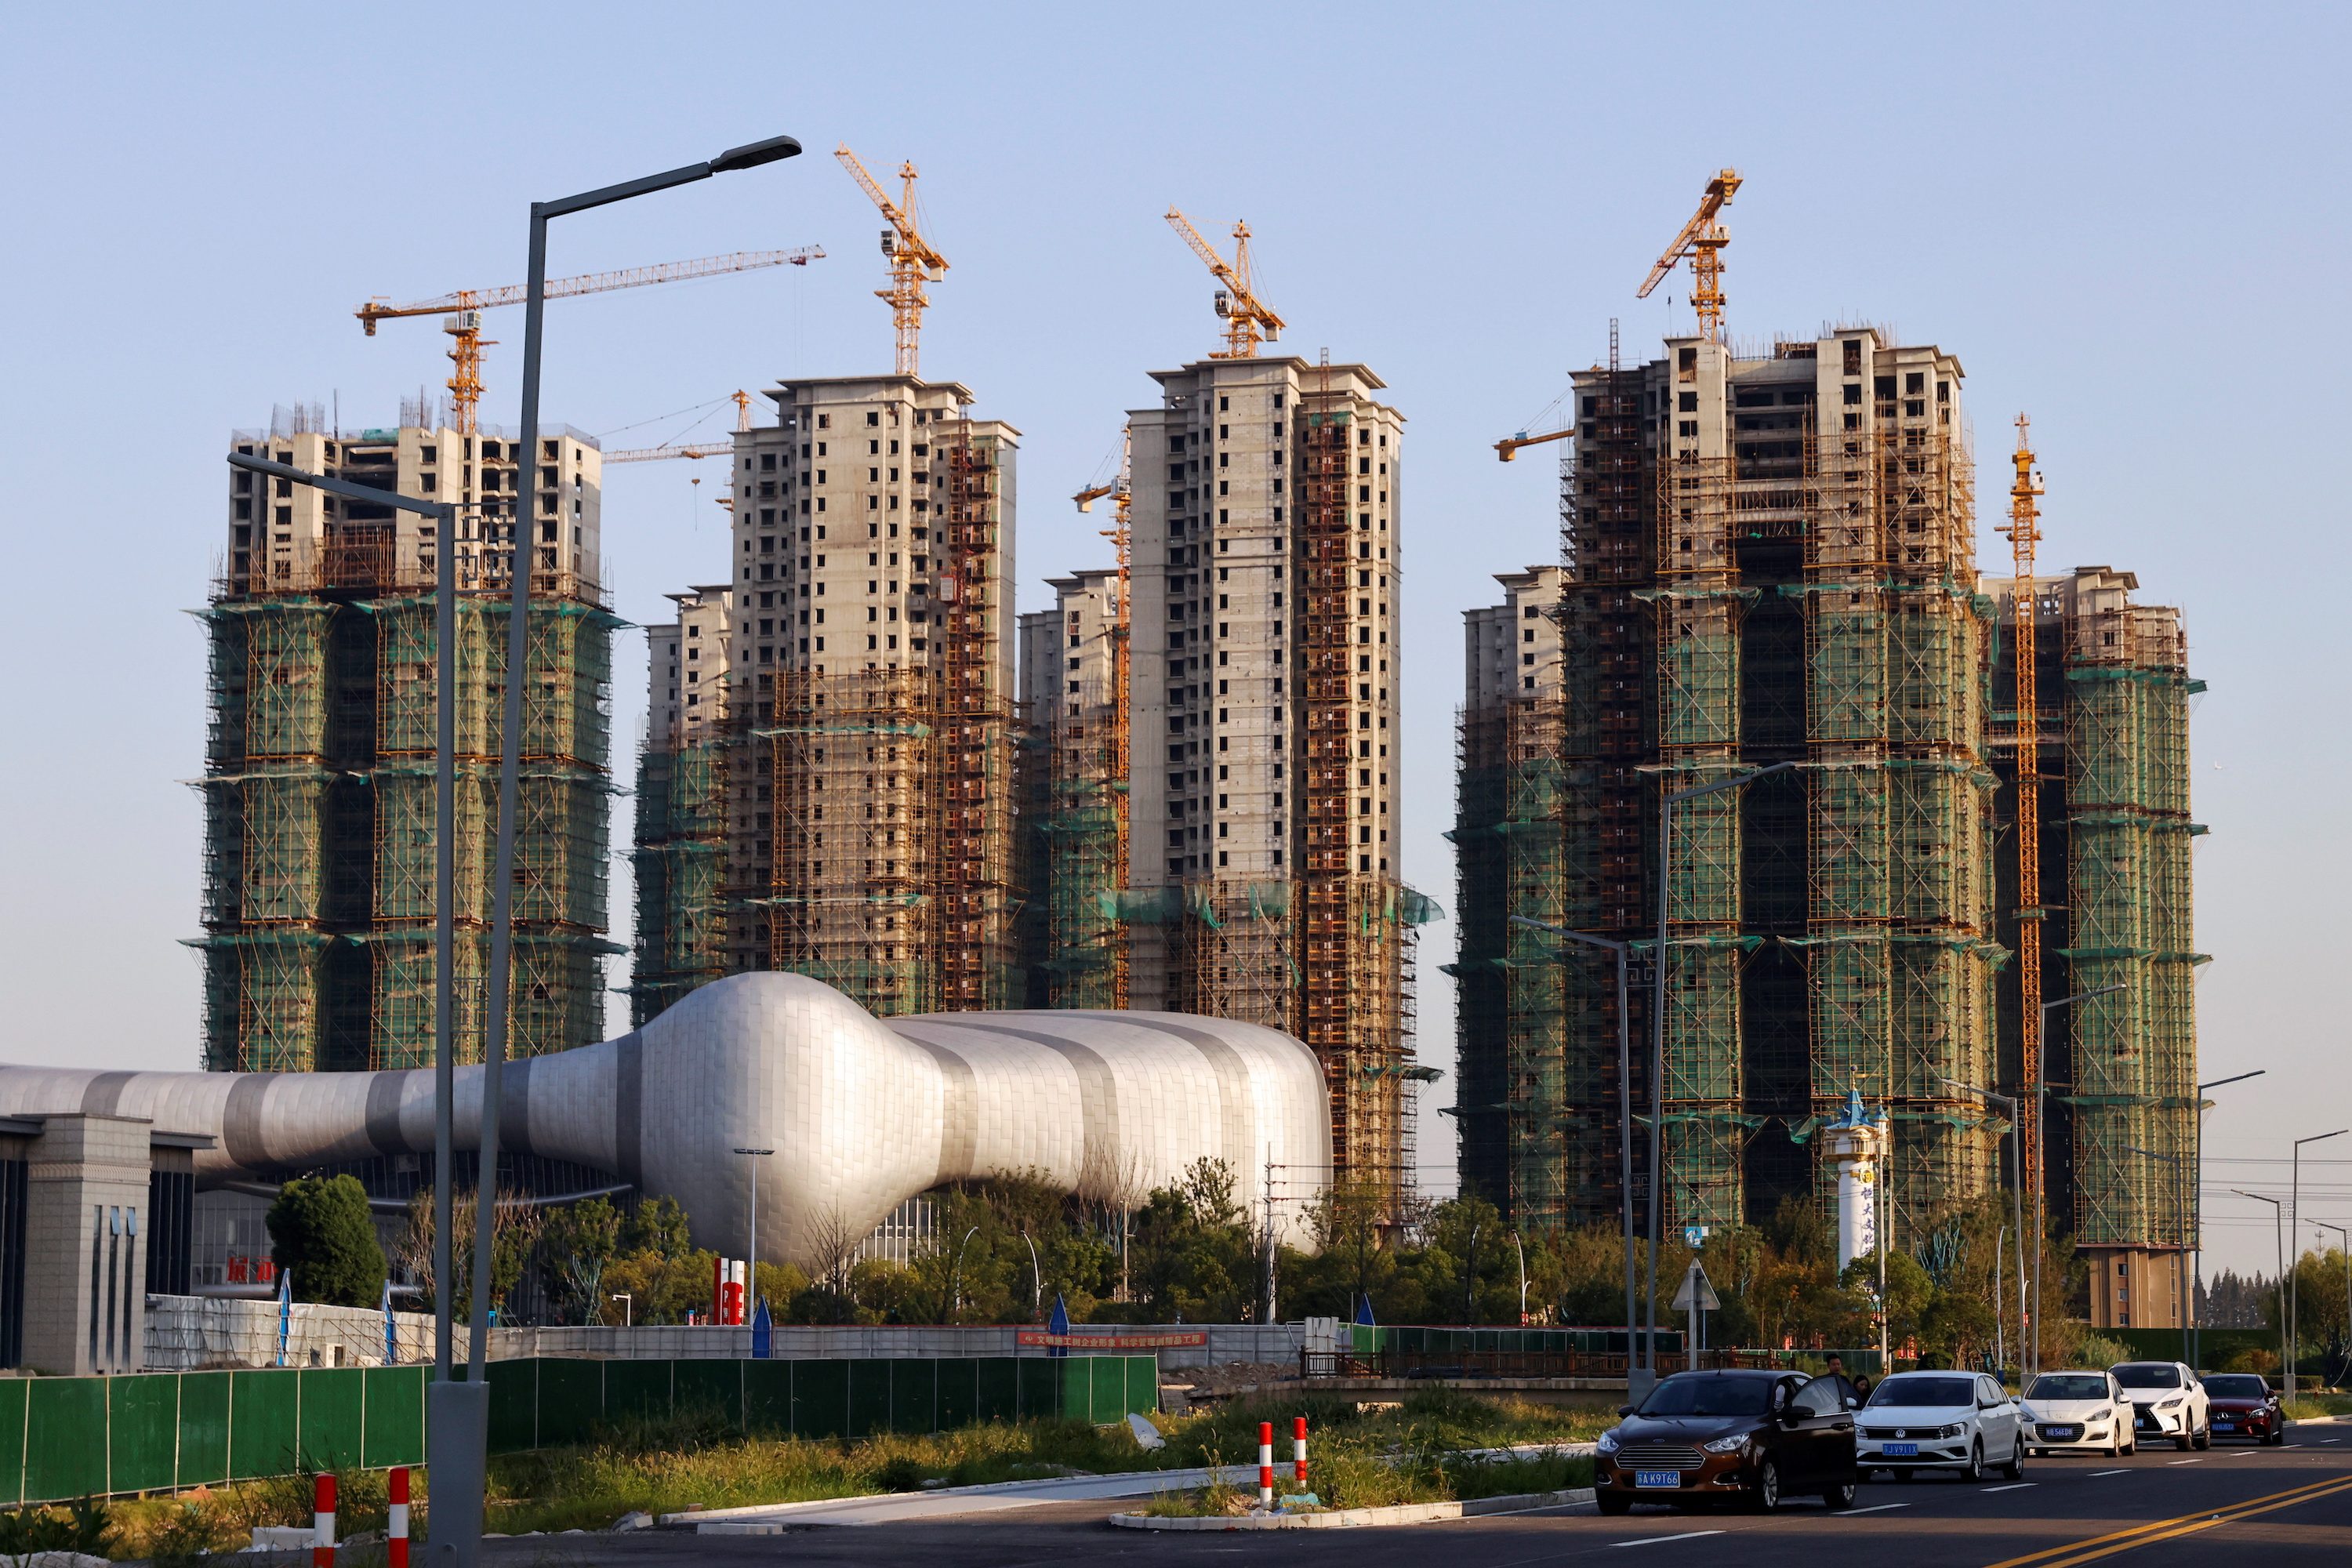 China’s property sector default woes deepen amid Evergrande disquiet